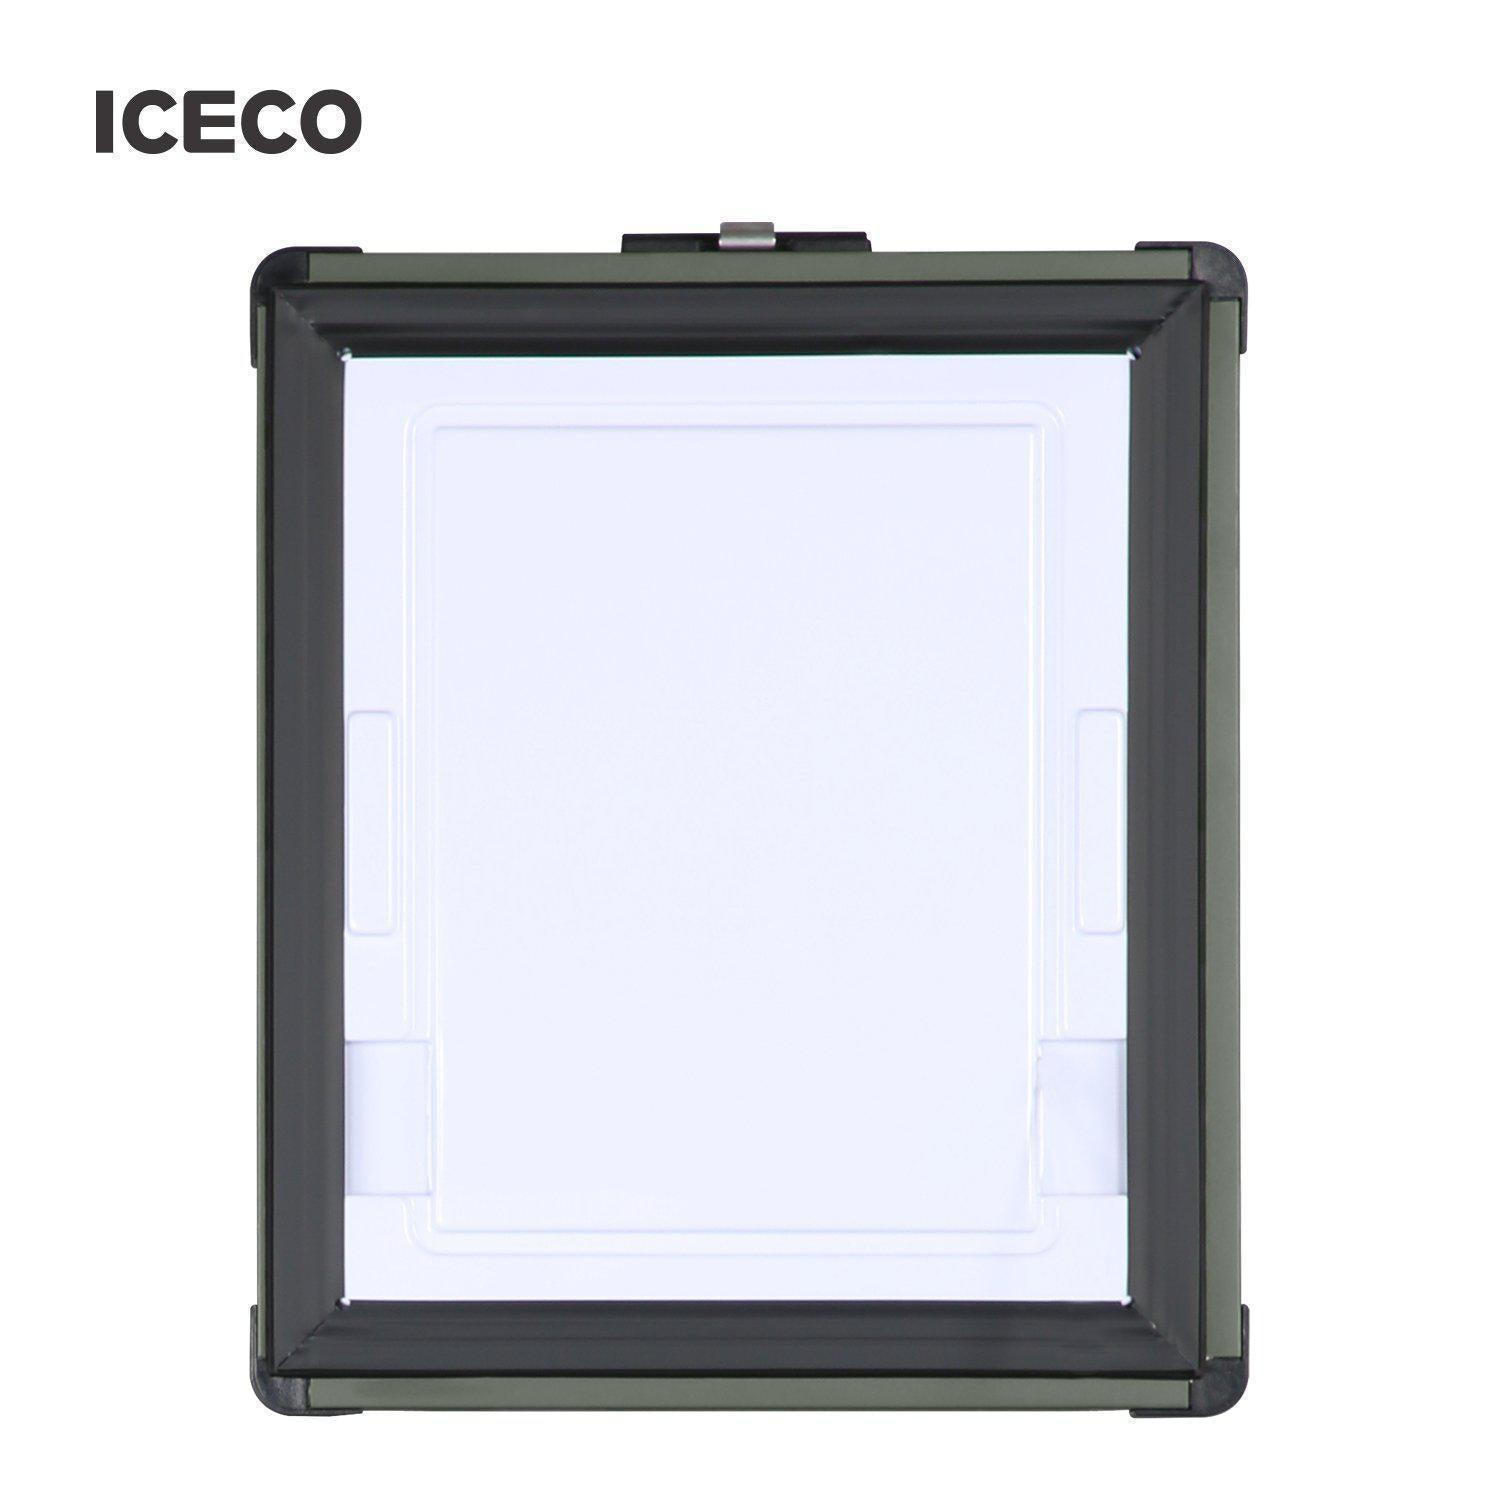 Spare Lid for ICECO VL60 dual zone